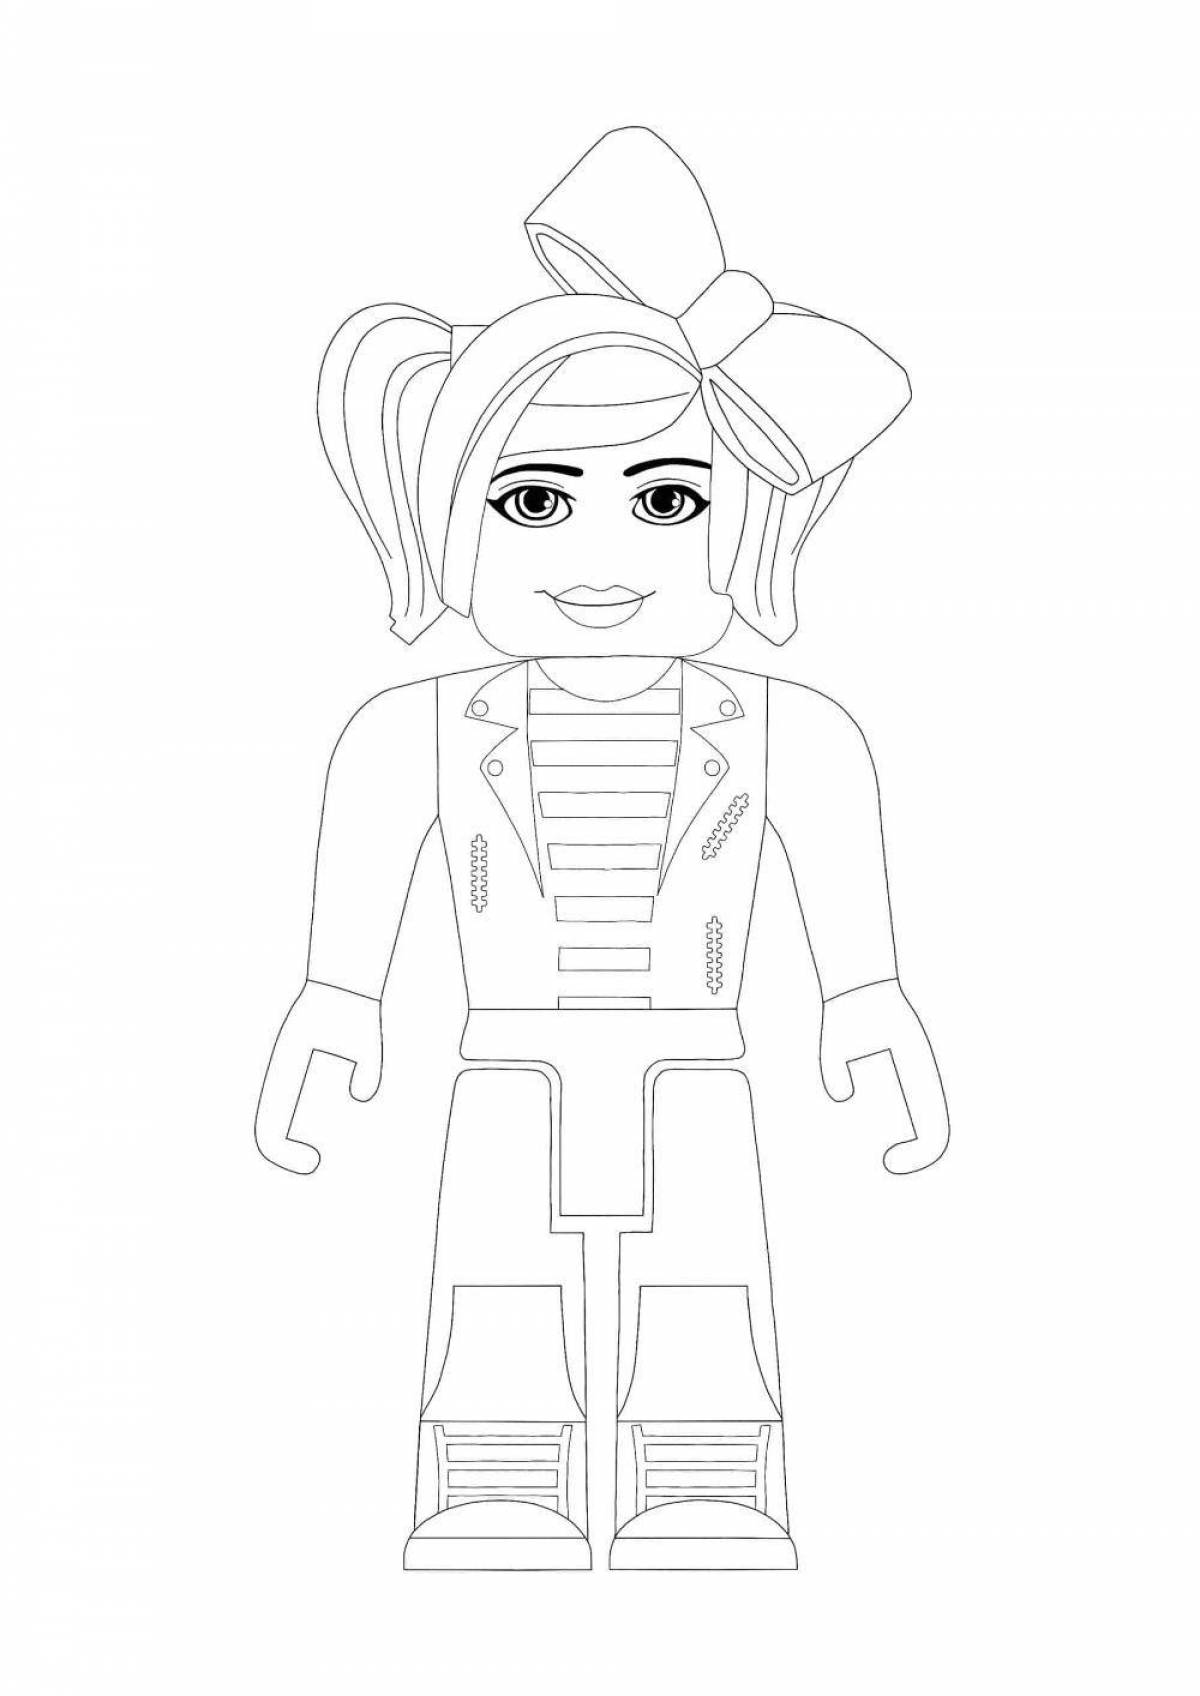 Playful roblox game coloring page